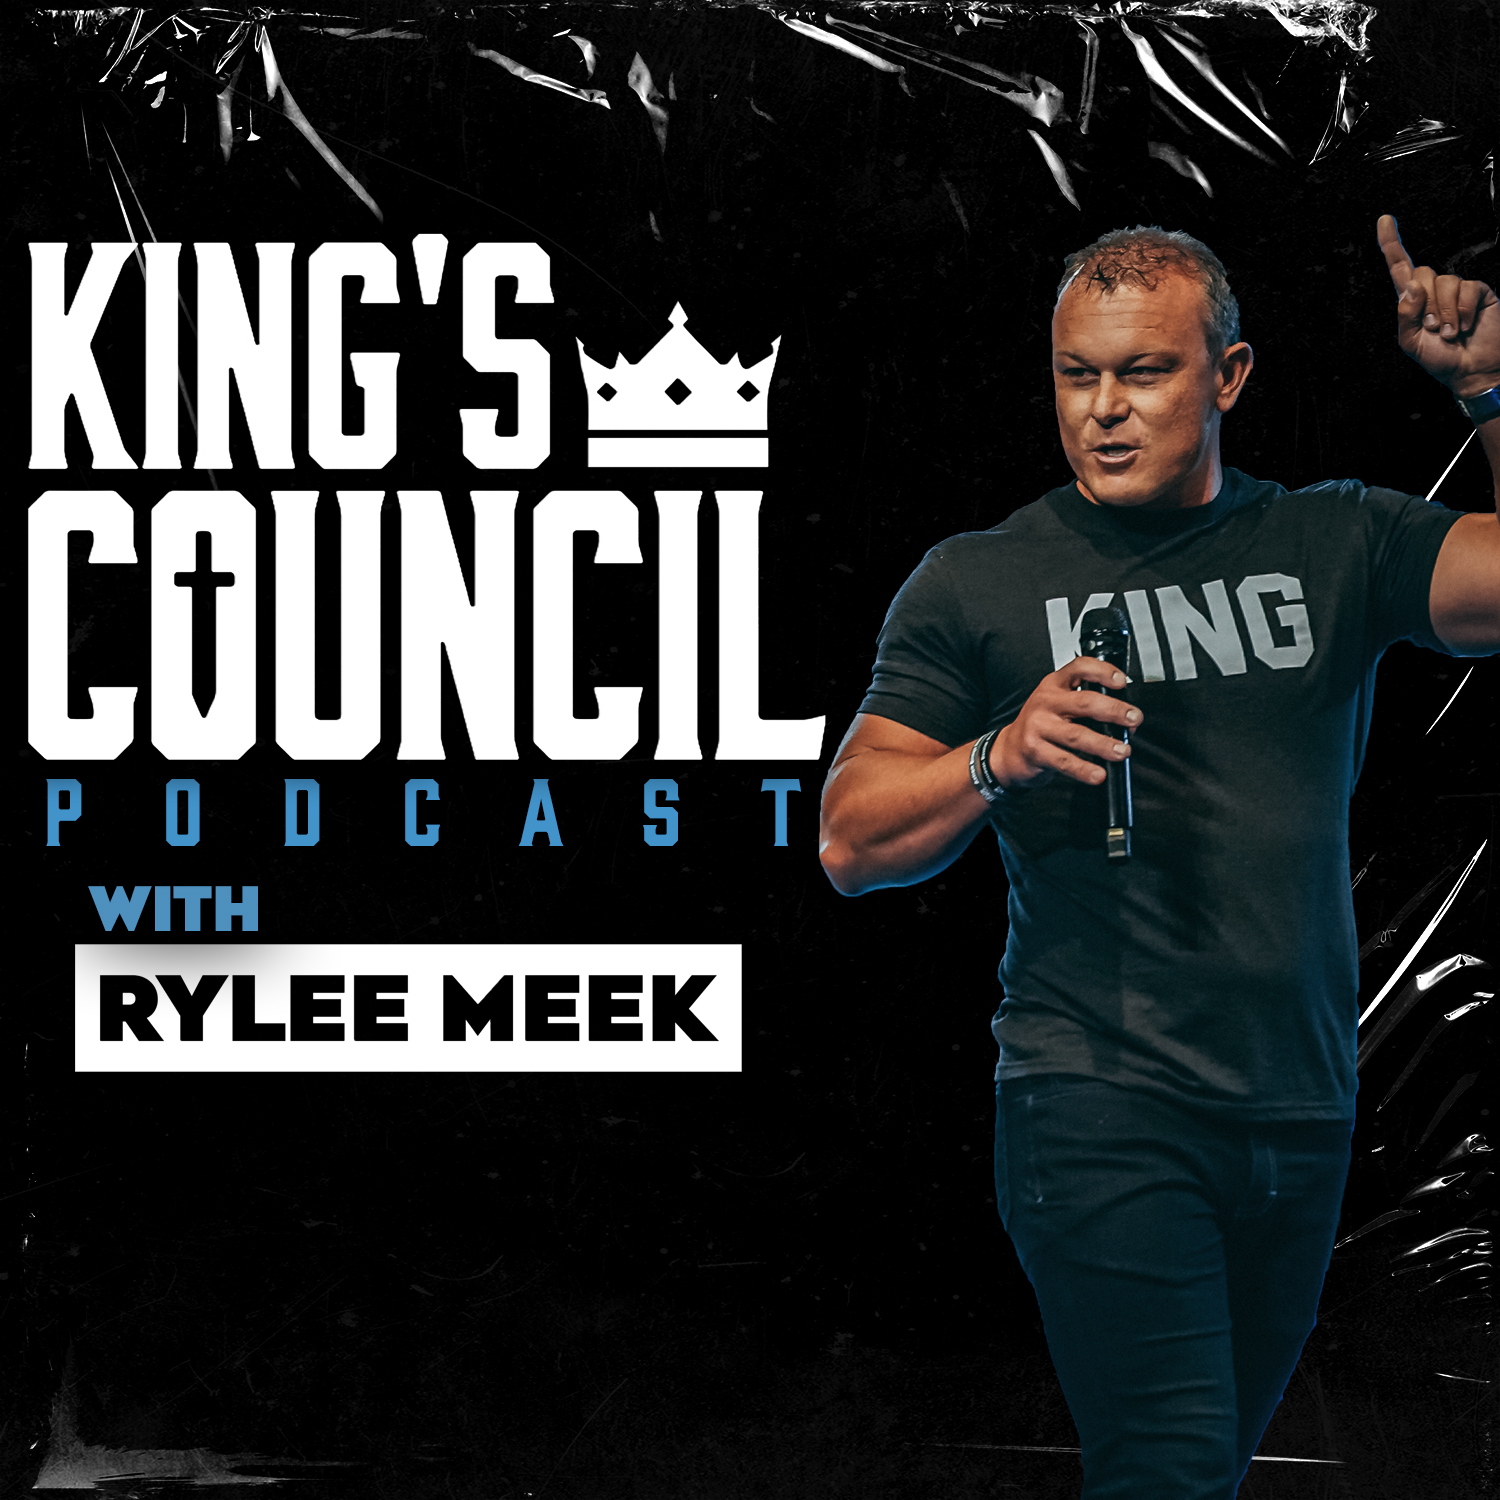 Artwork for podcast King's Council Podcast with Rylee Meek